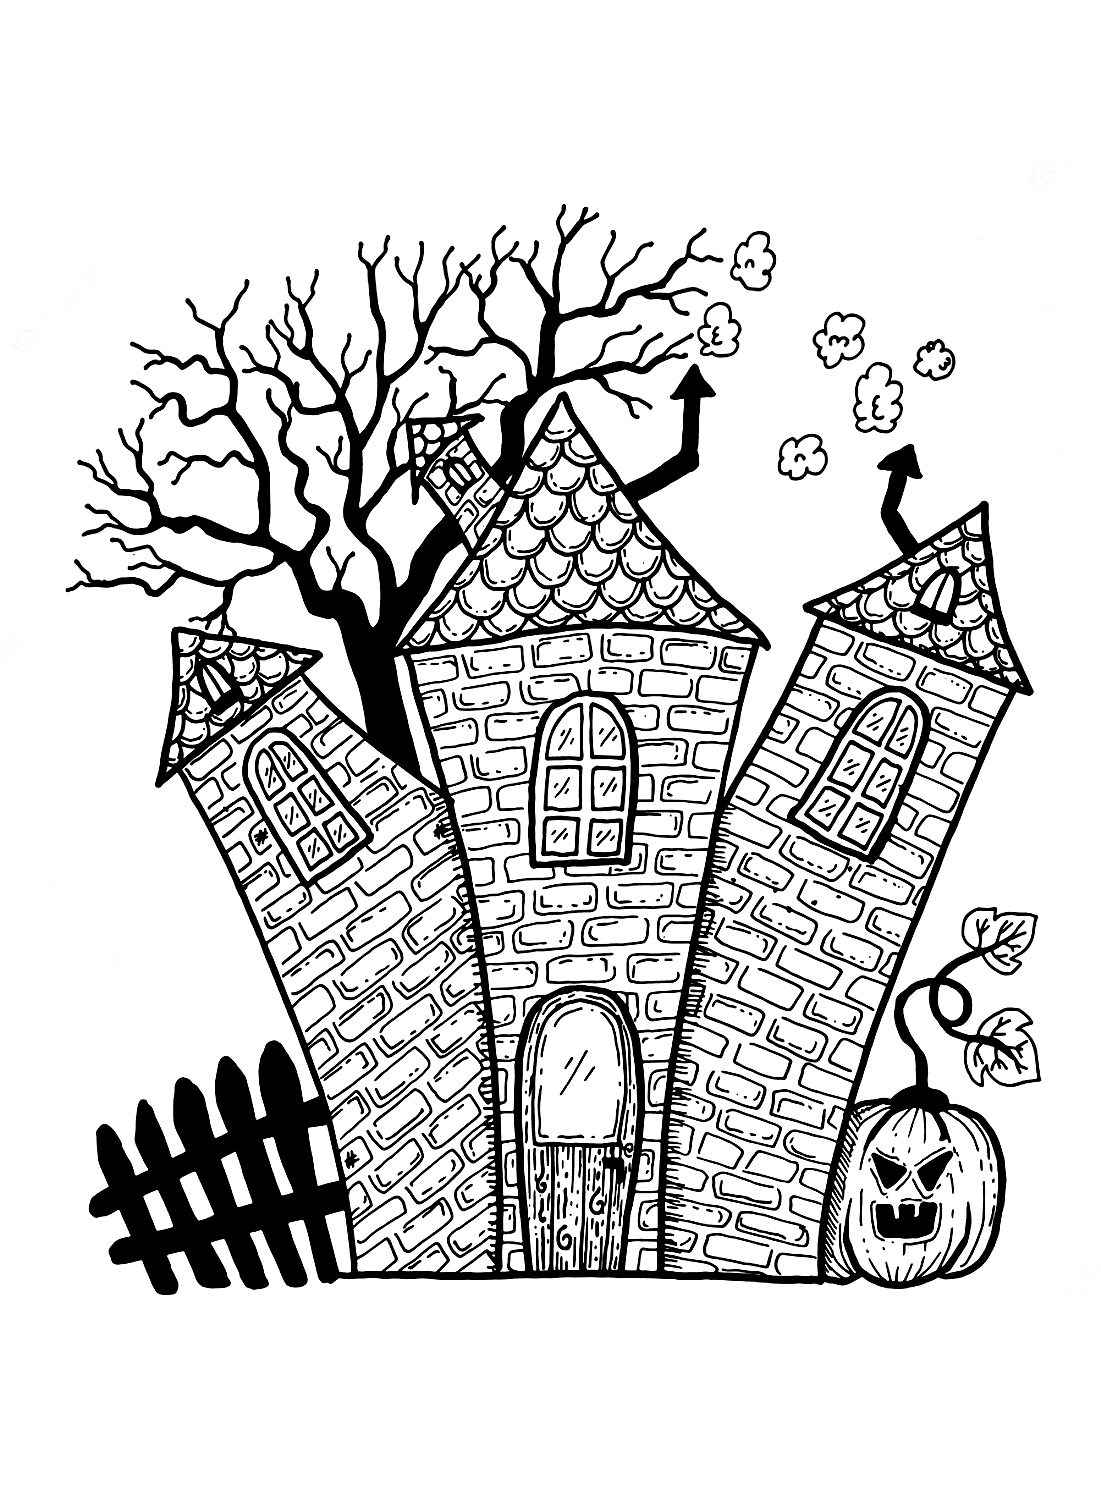 Haunted house coloring pages for adults